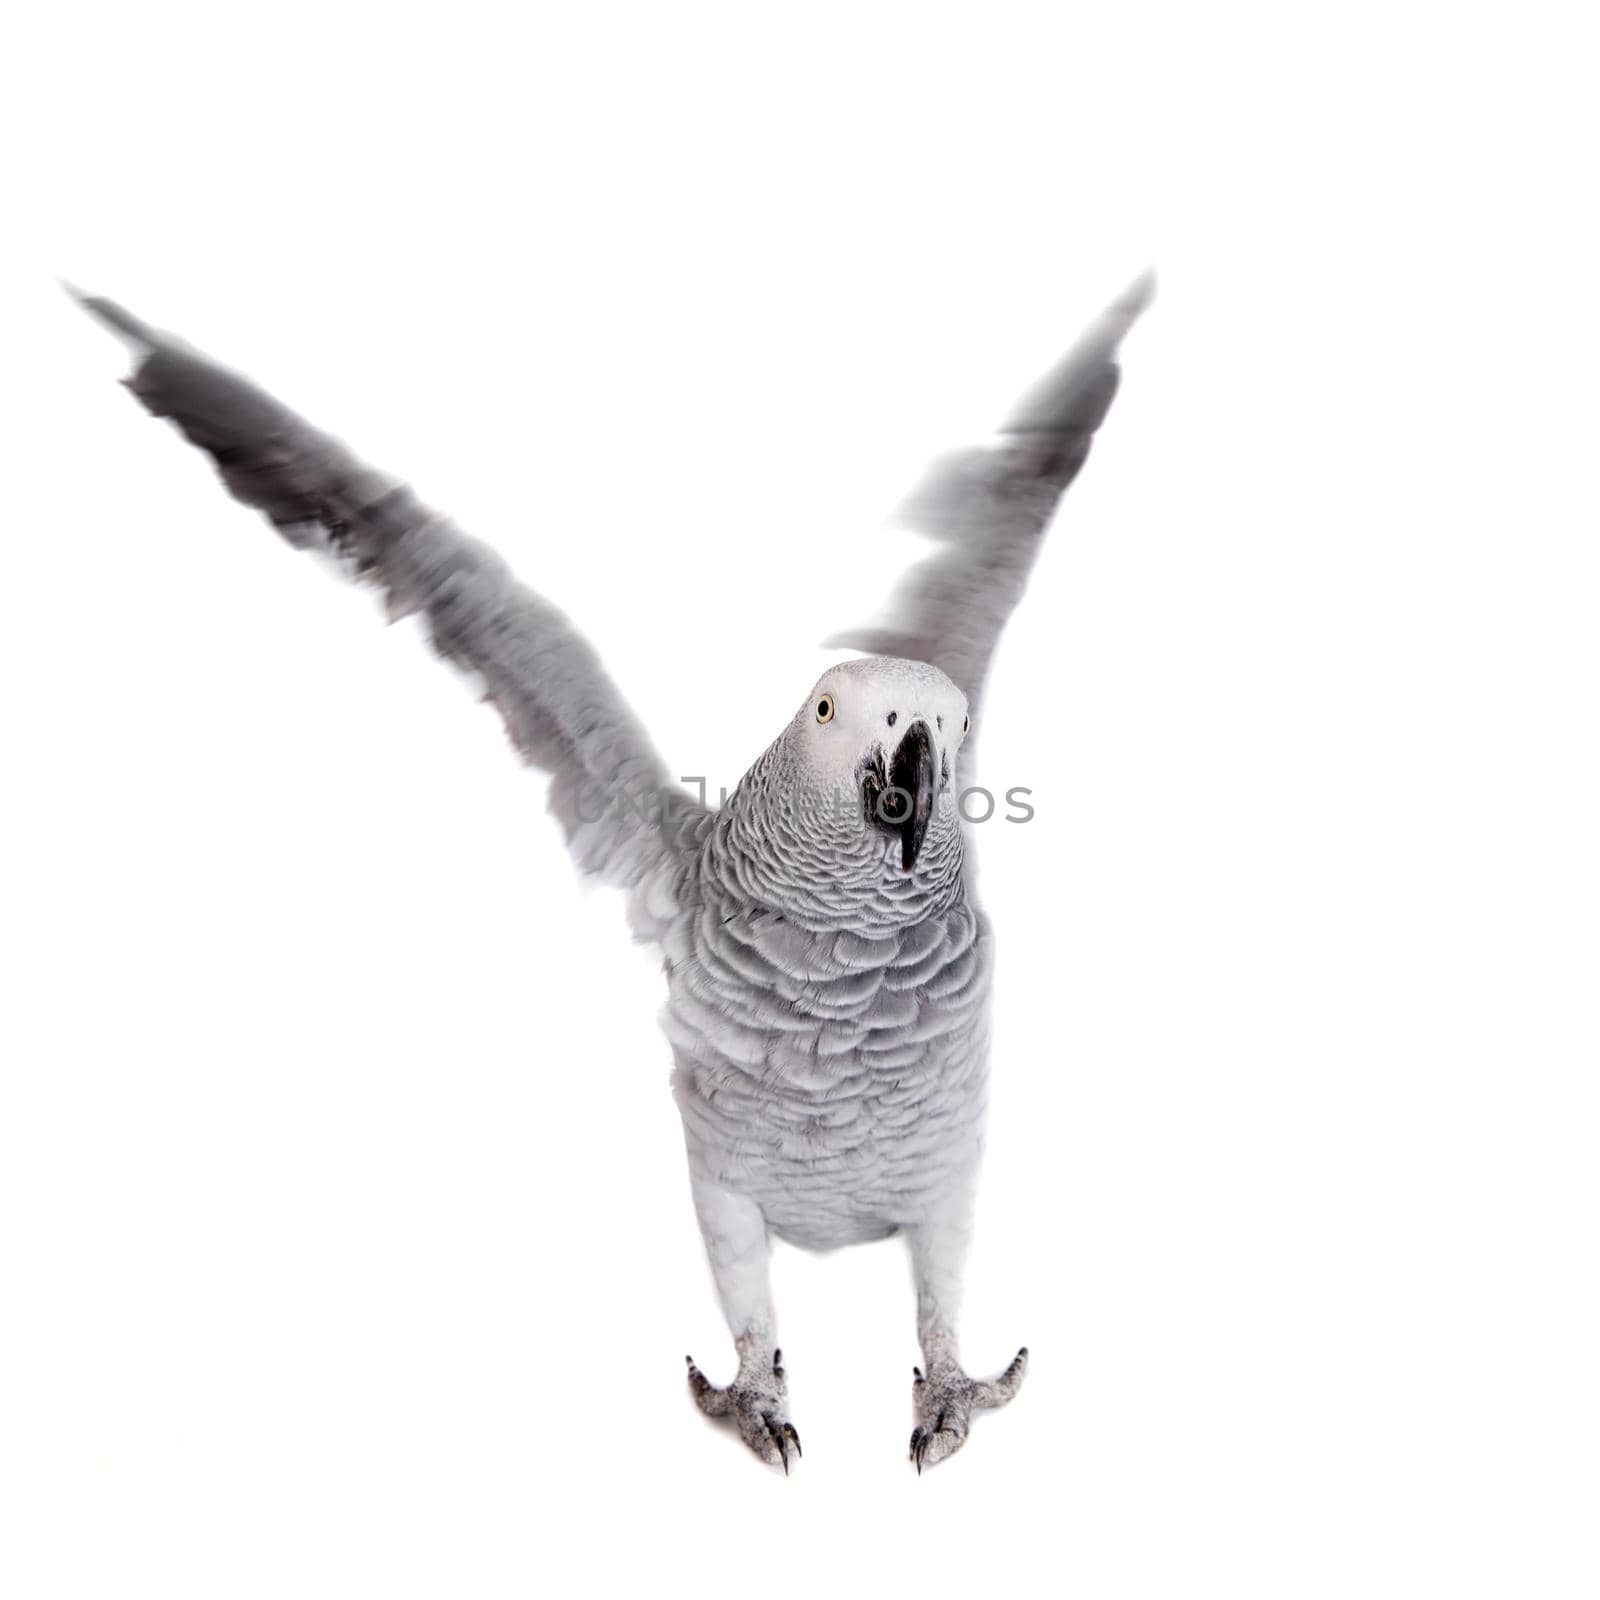 African Grey Parrot, Psittacus erithacus, isolated on white background